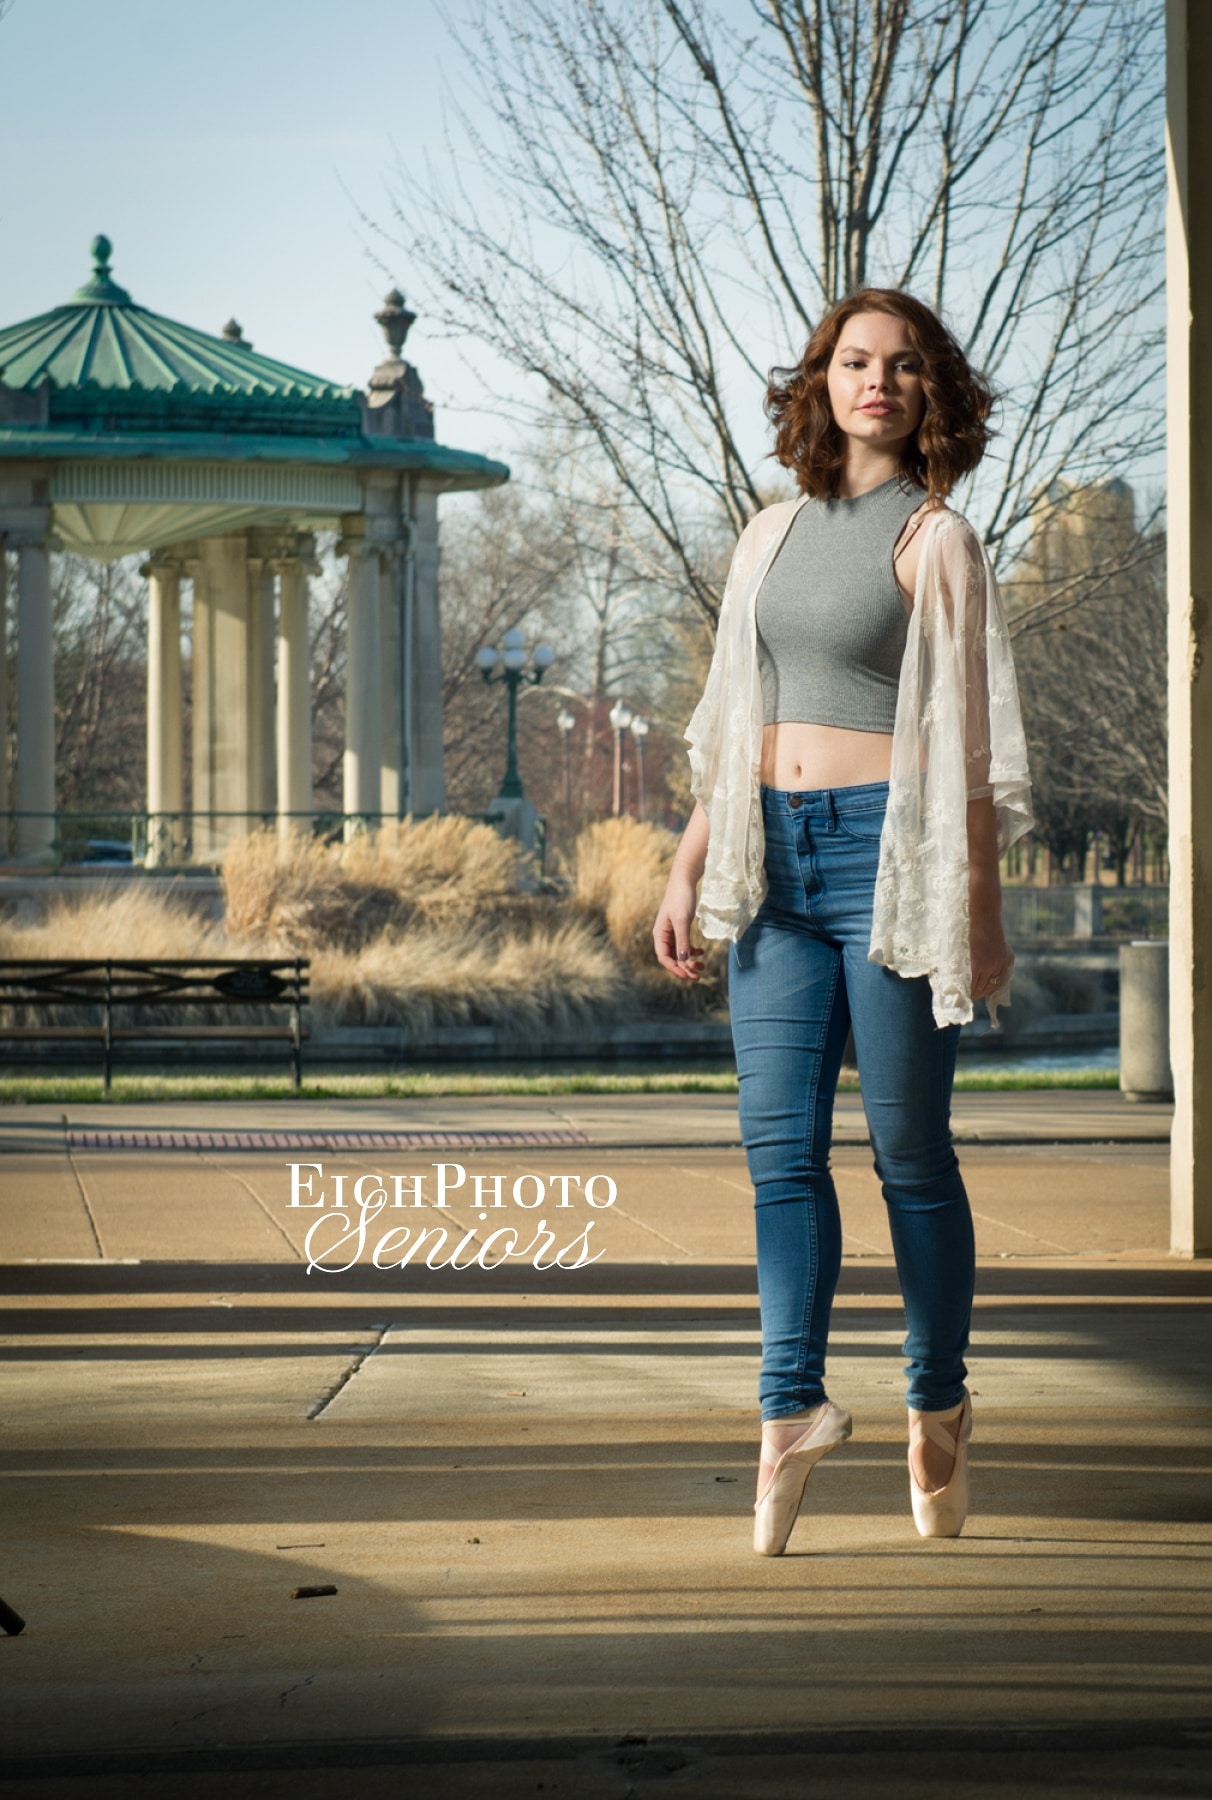 Effortless Ballet Dance Pose in Pointe Shoes, blue jeans, crop top, and a lace duster at the Muny Senior Portraits in Forest Park. Senior Photographers in St. Louis